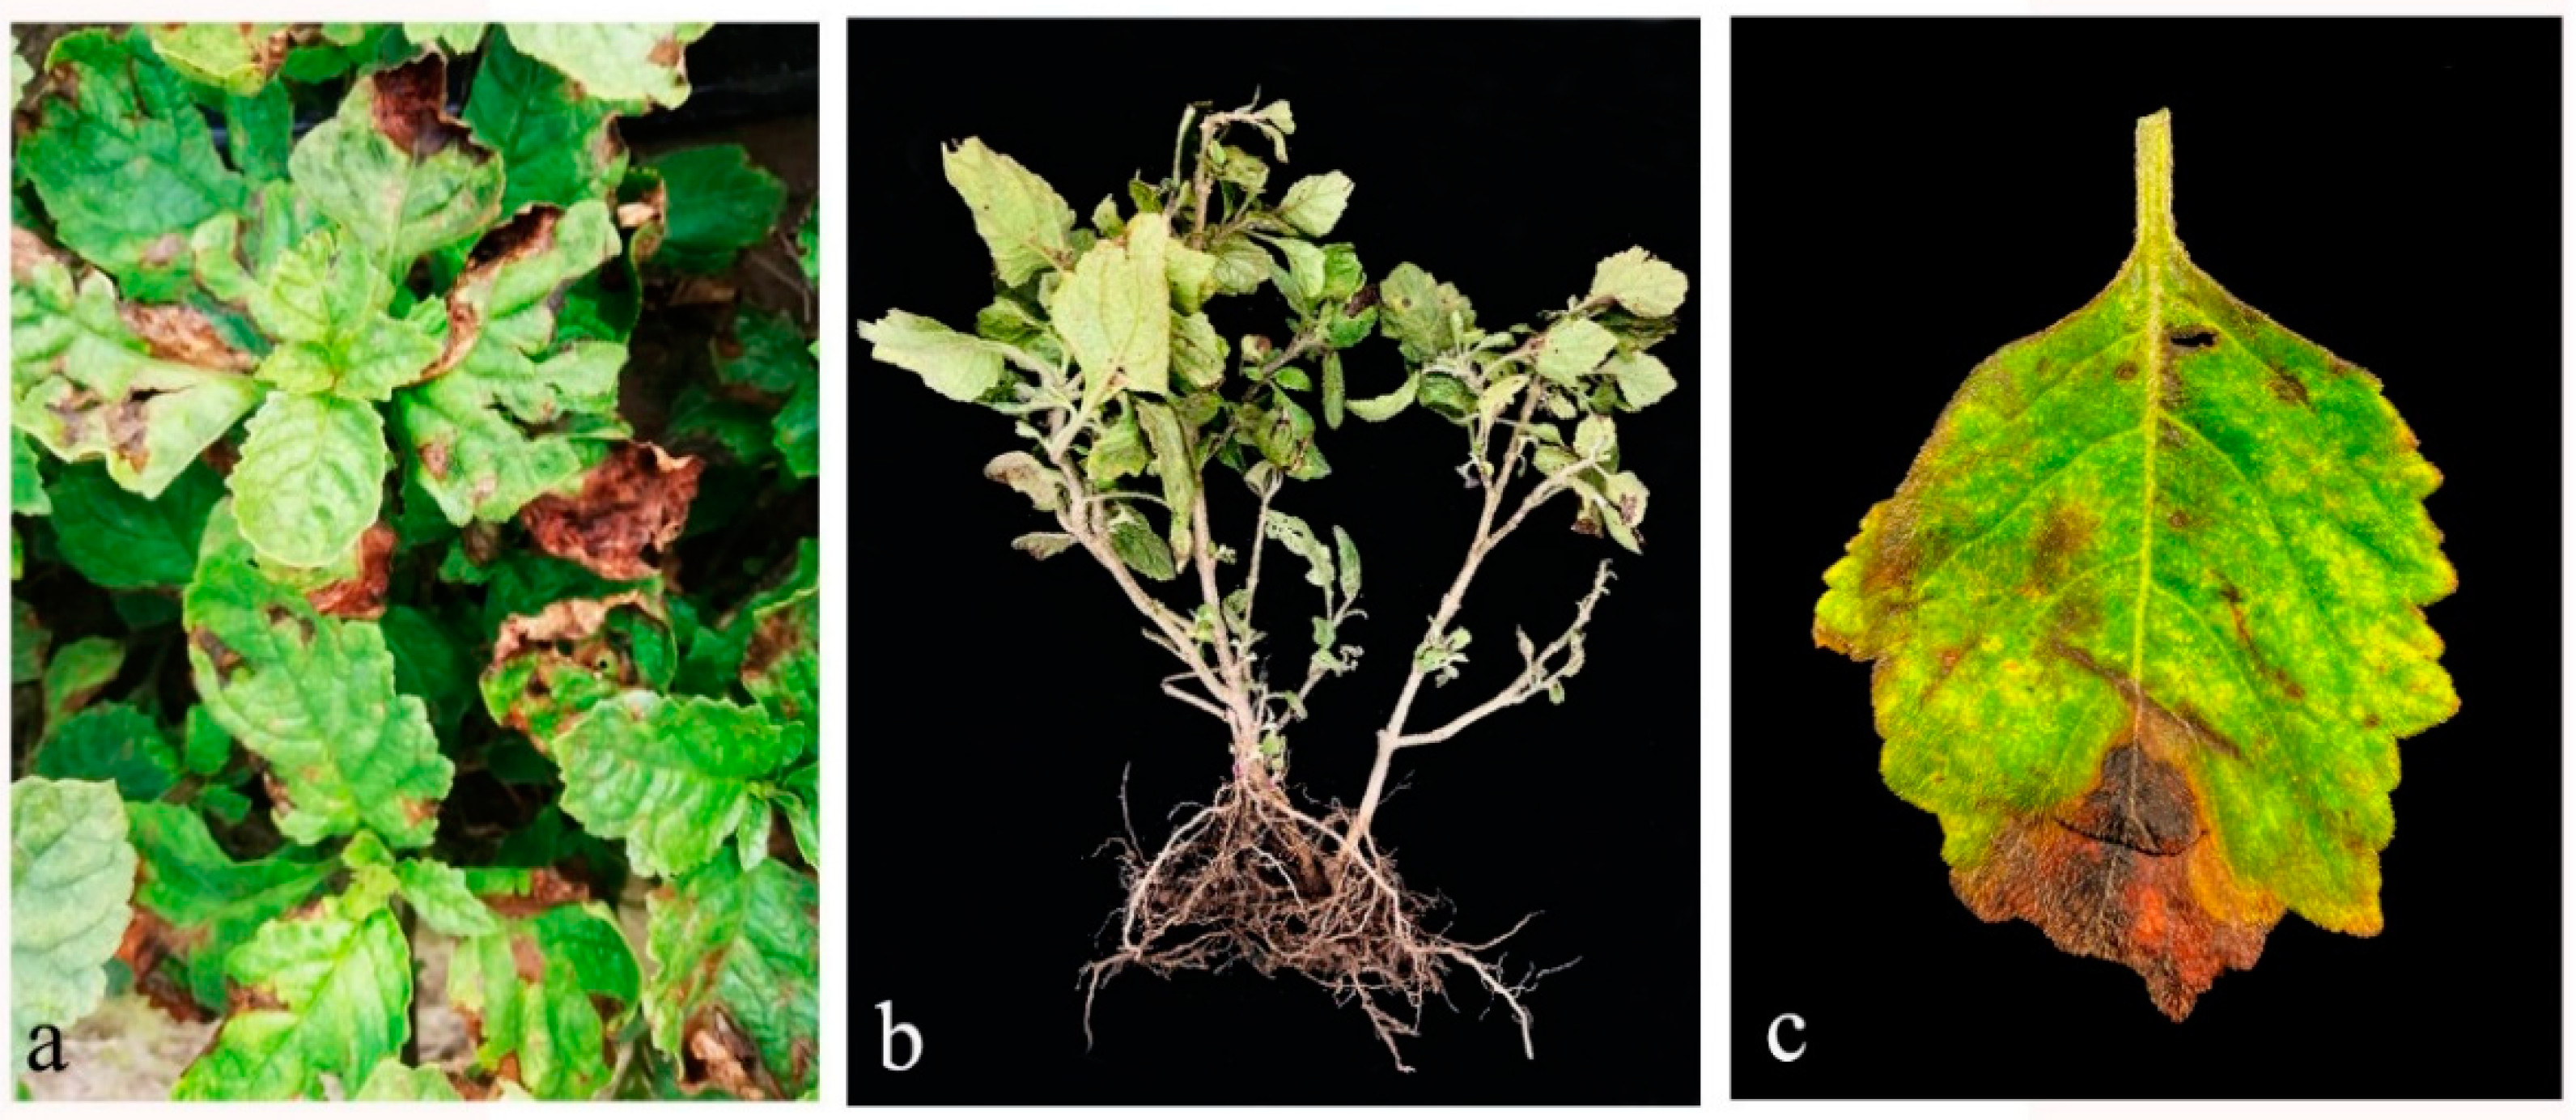 xf and infection in plant